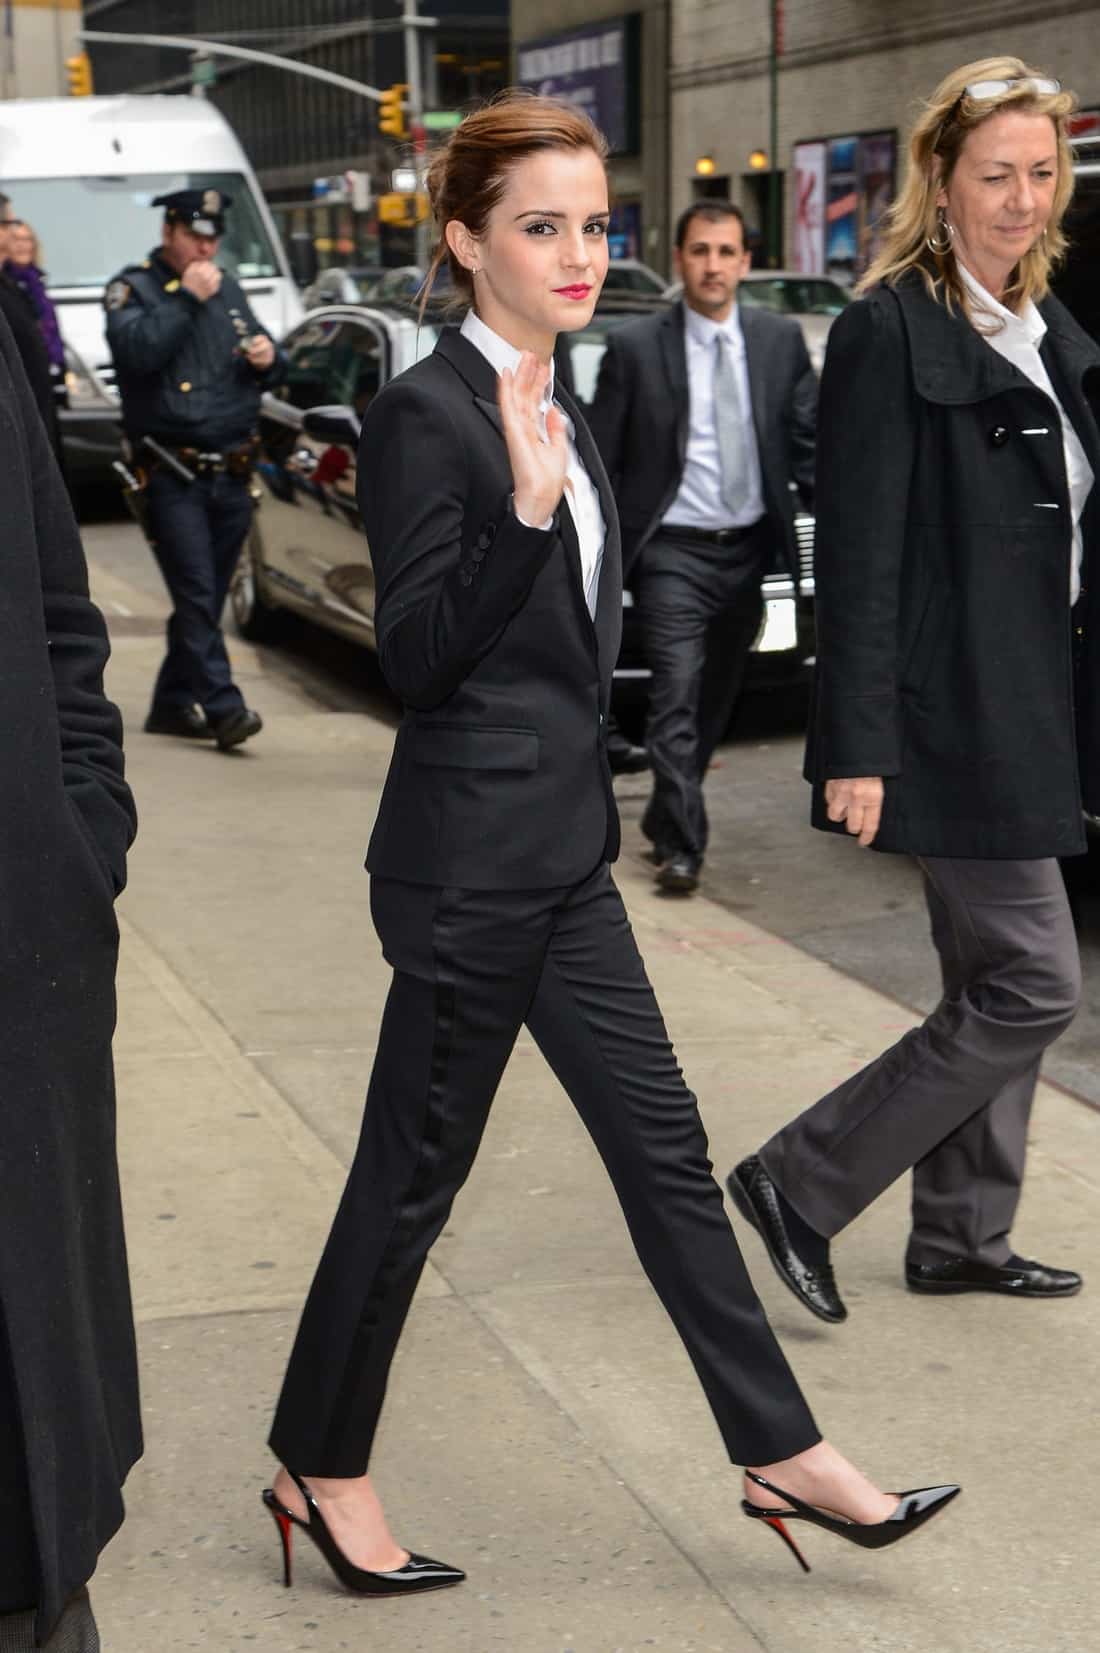 Emma Watson Looked Incredible Stylish as She Posed in Midtown Manhattan